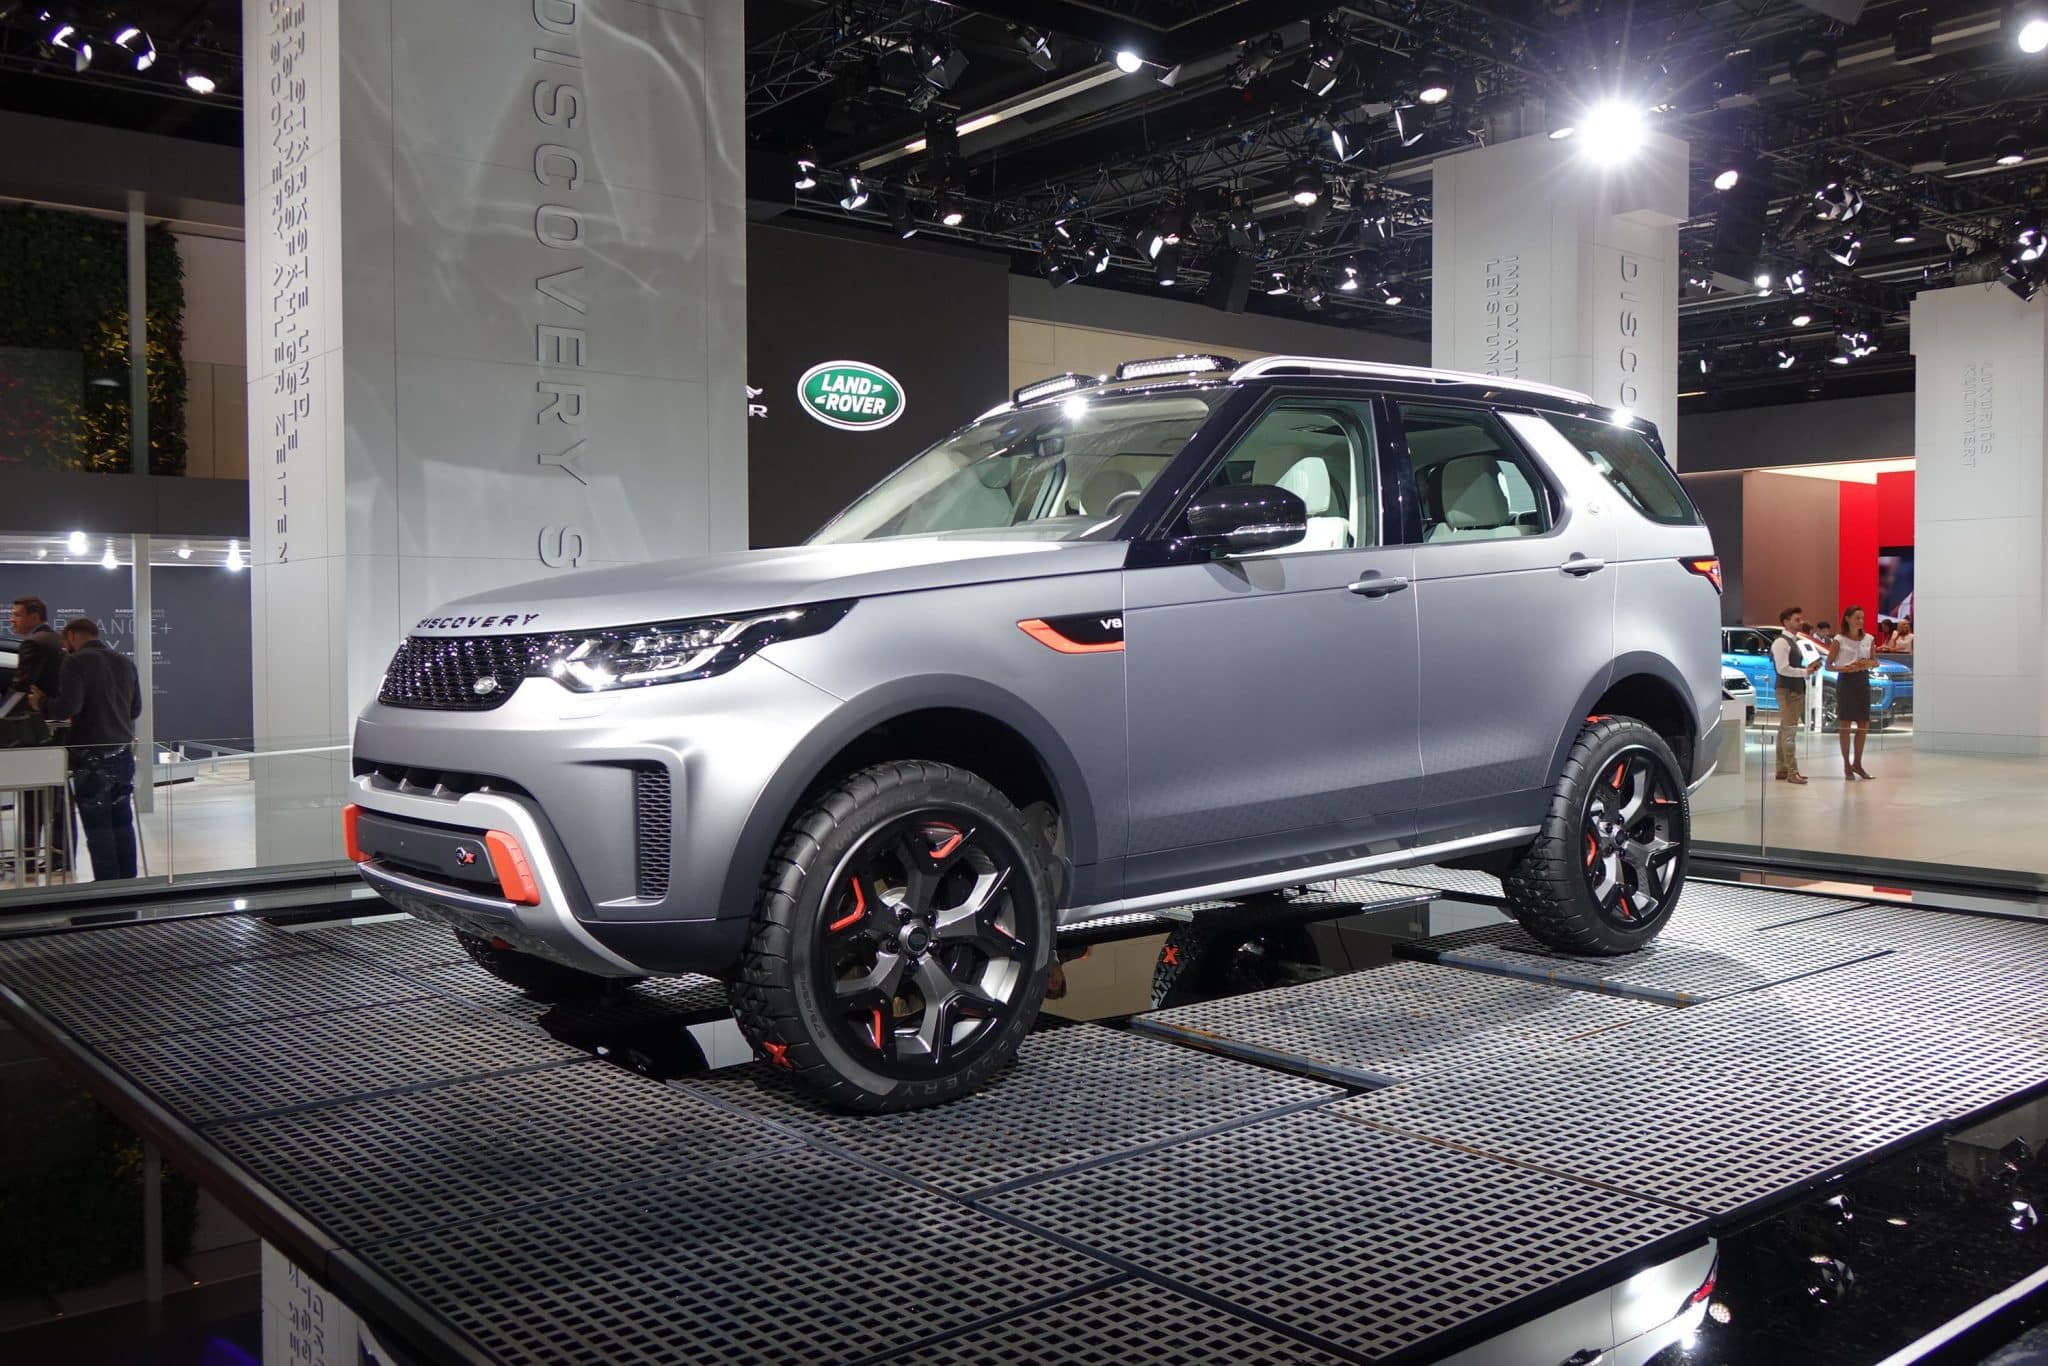 LAND ROVER DISCOVERY 8 CIL TDIES ▶ Impuesto Vehicular ≫